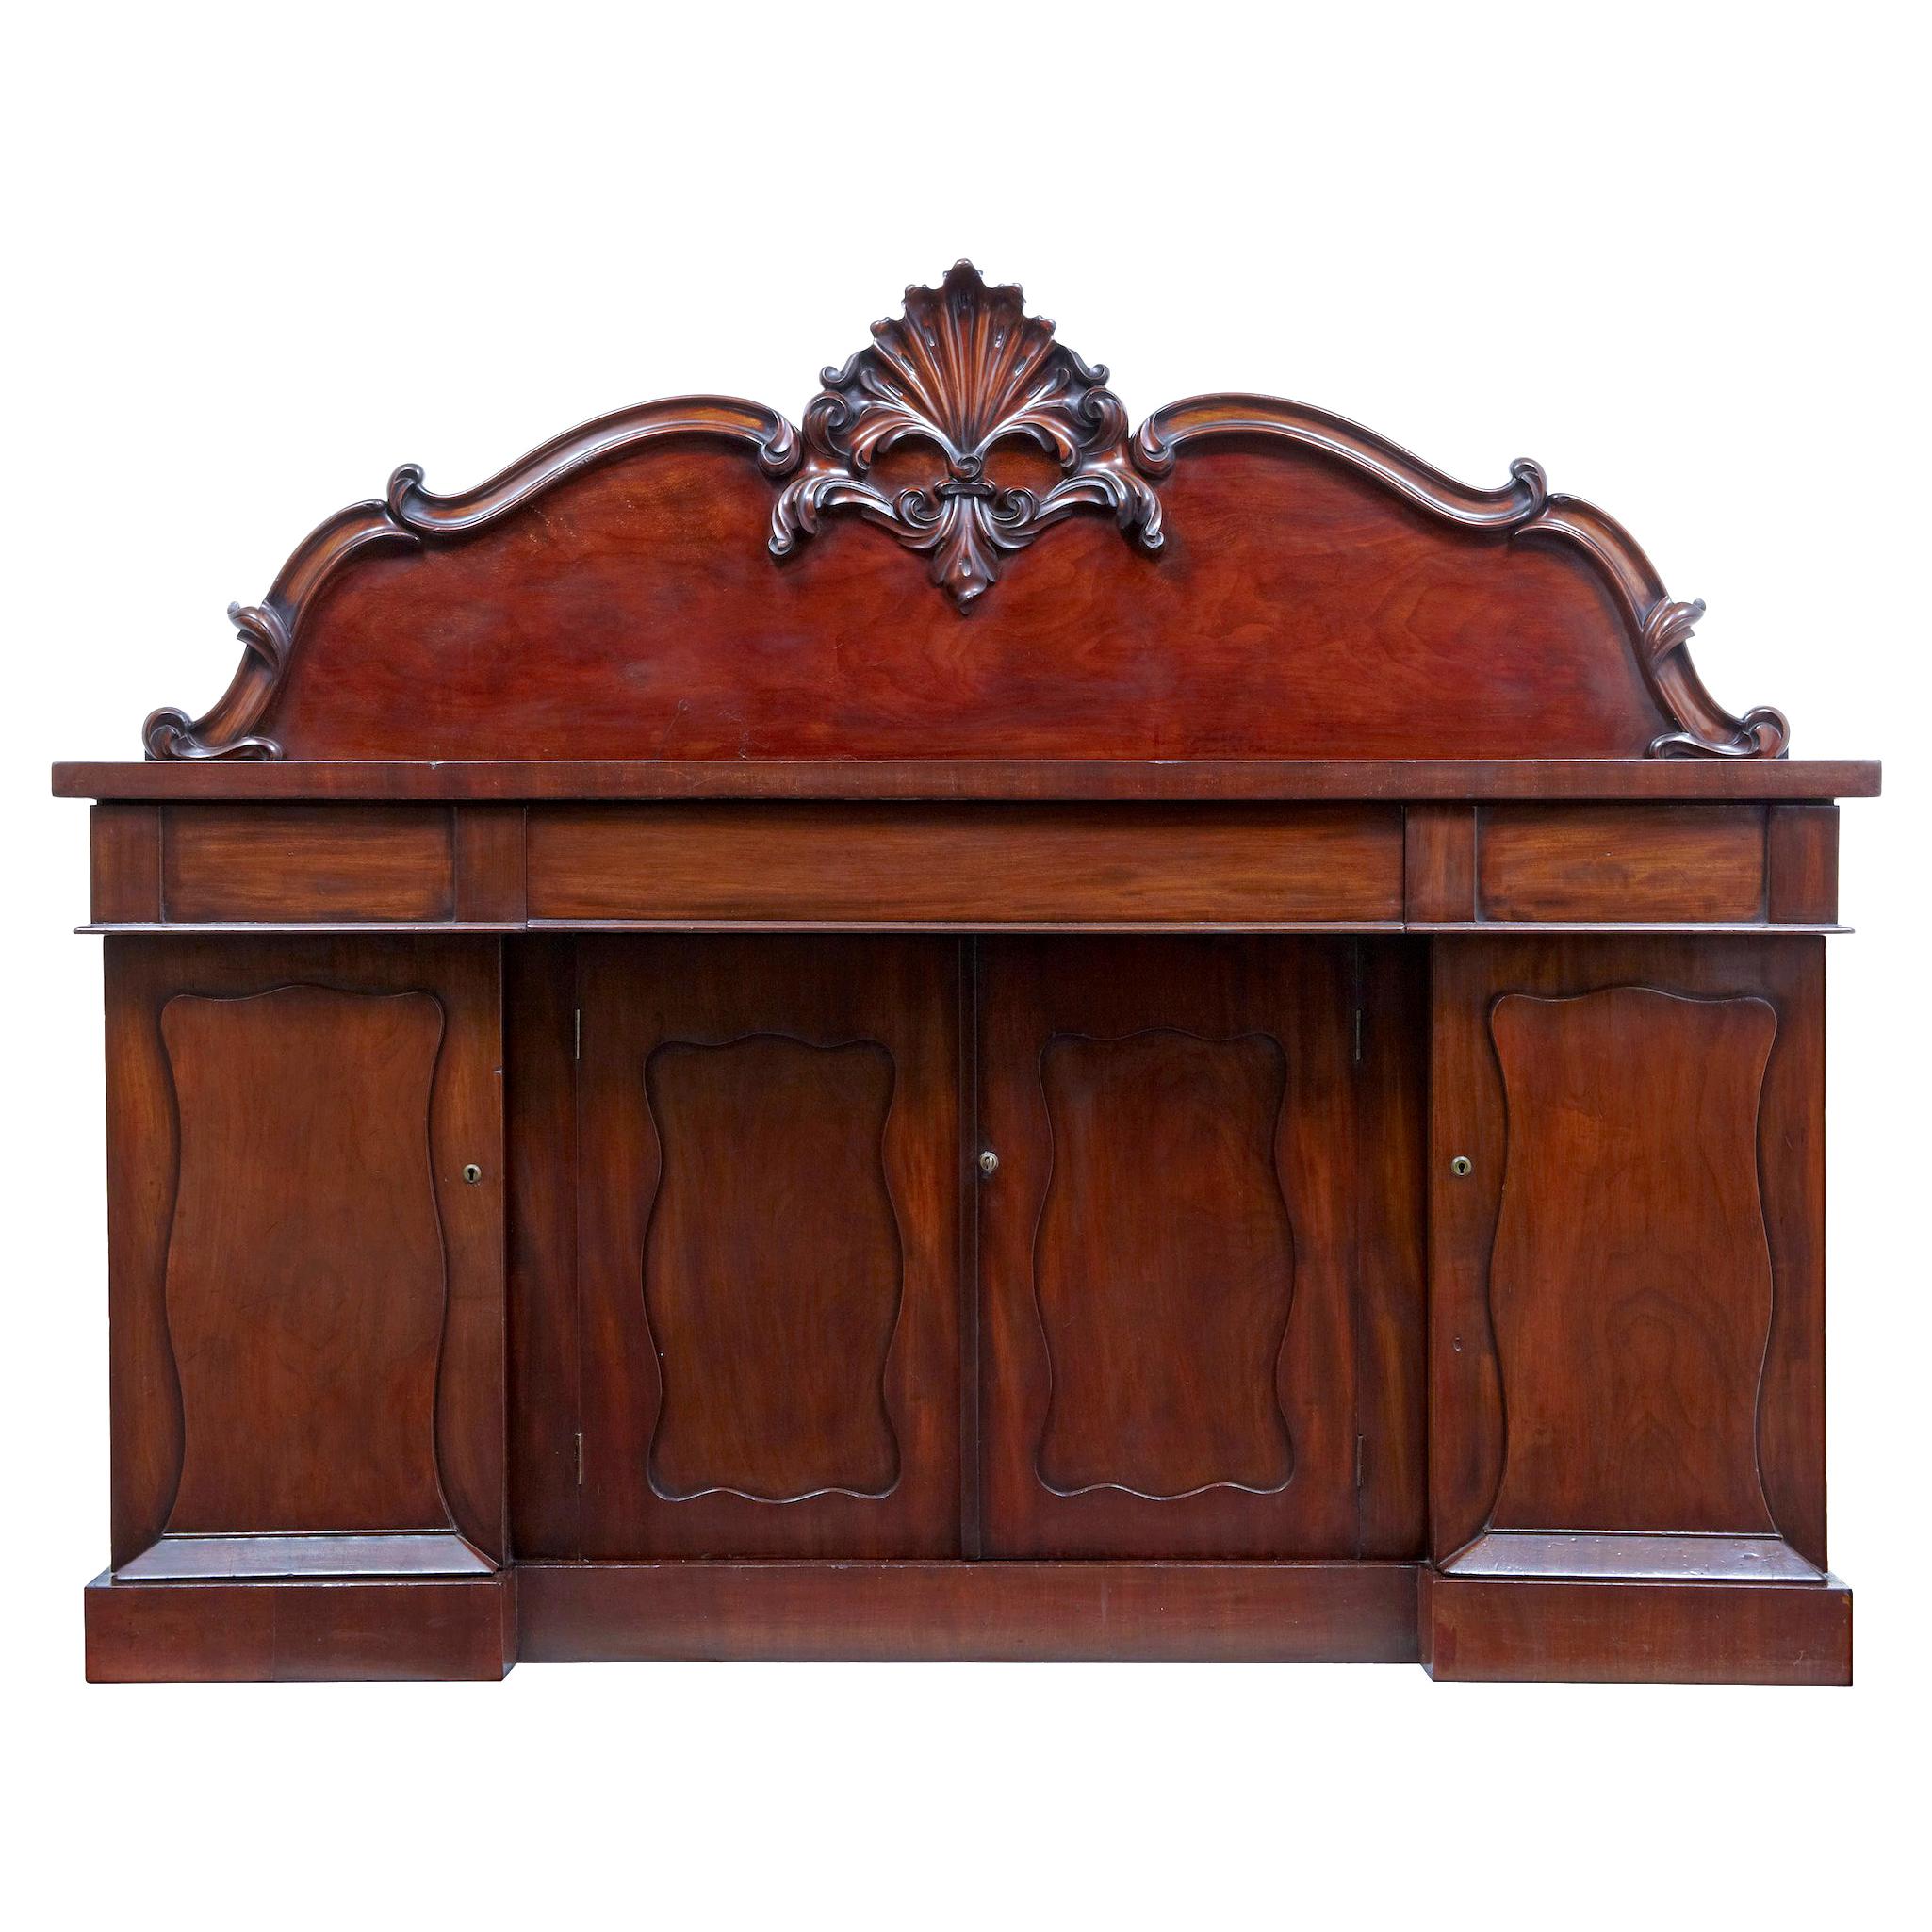 19th Century William IV Carved Mahogany Sideboard